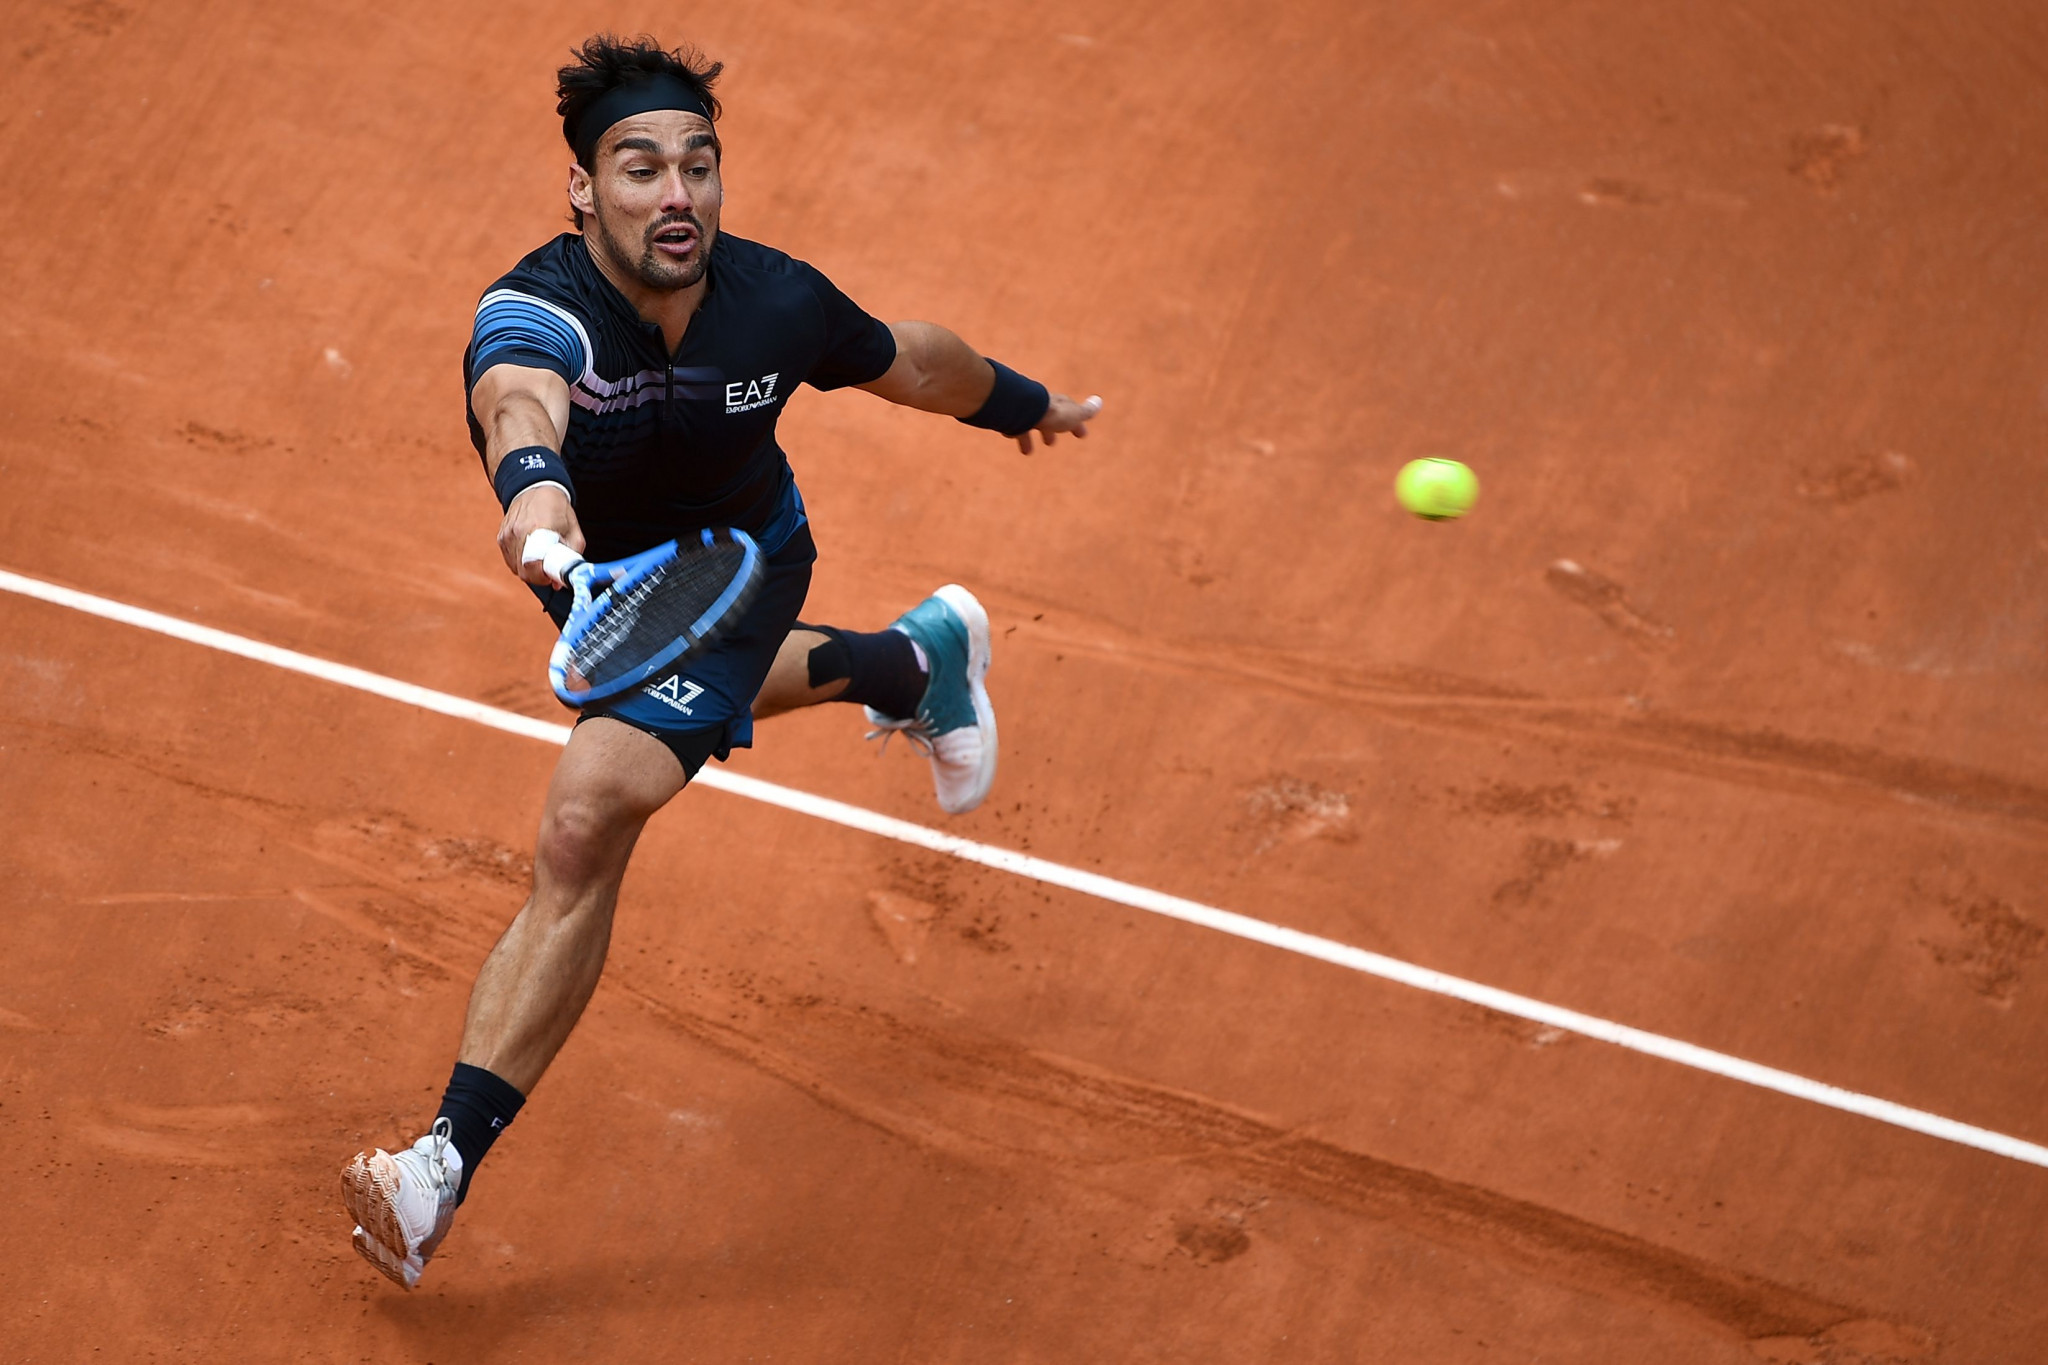 Fabio Fognini overcame Andreas Seppi in an all-Italian first-round clash ©Getty Images